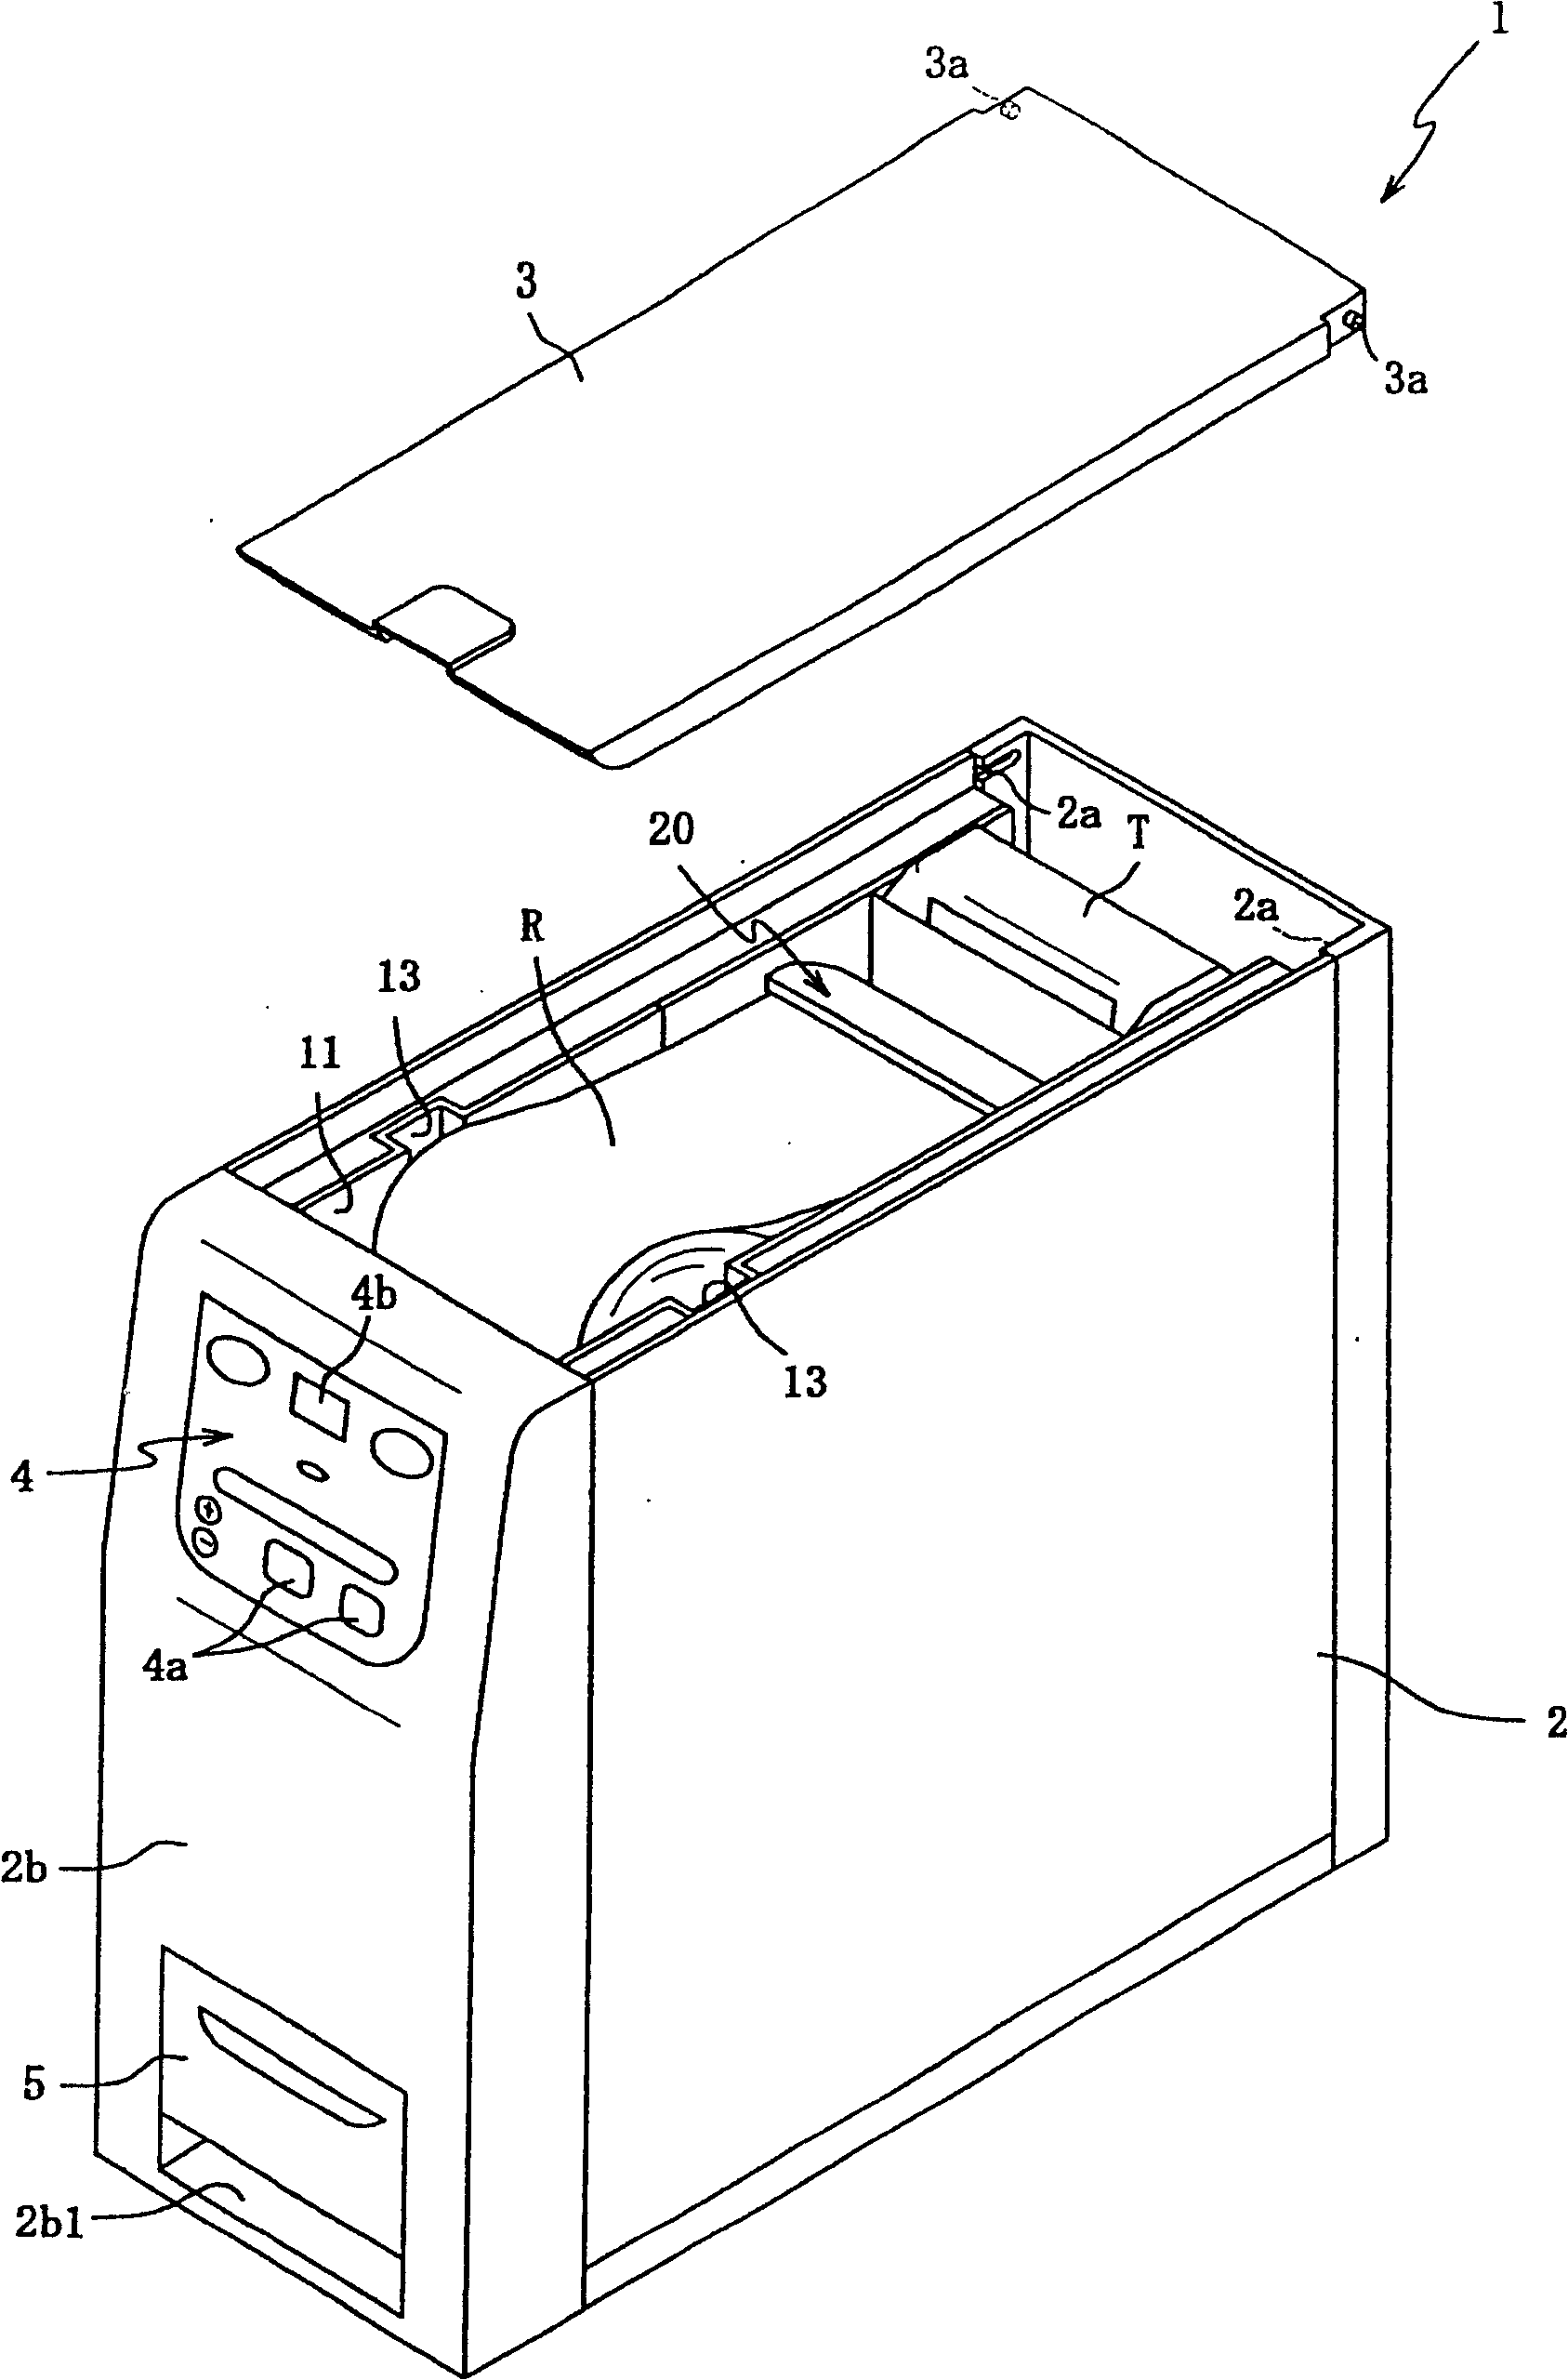 Roll napkin manufacturing device